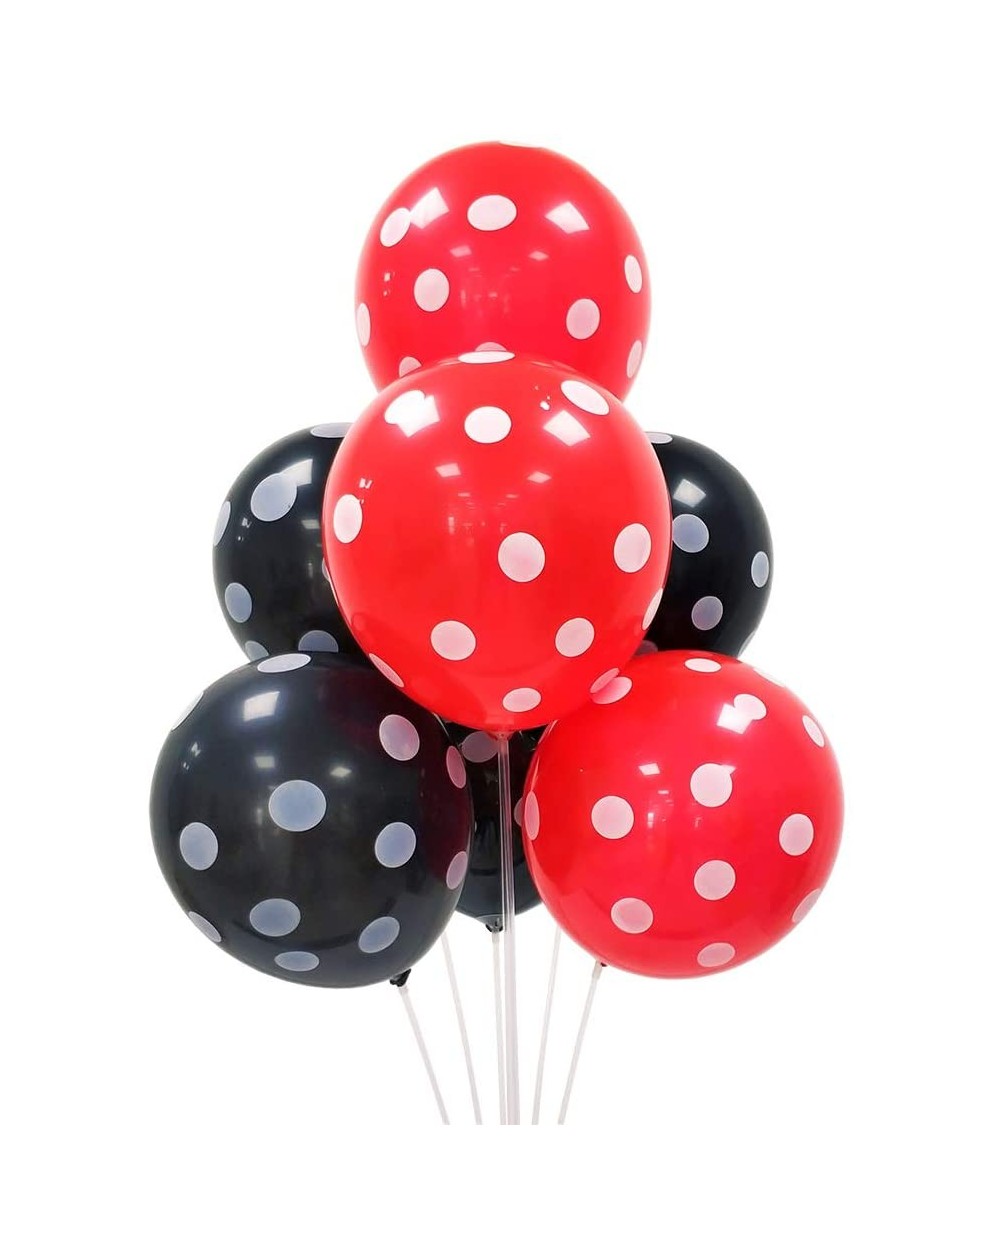 Balloons 100 PCS 12 Inch Latex Balloons Red and Black Polka Dot Balloons Decorations for Birthday Party Wedding Baby Shower S...